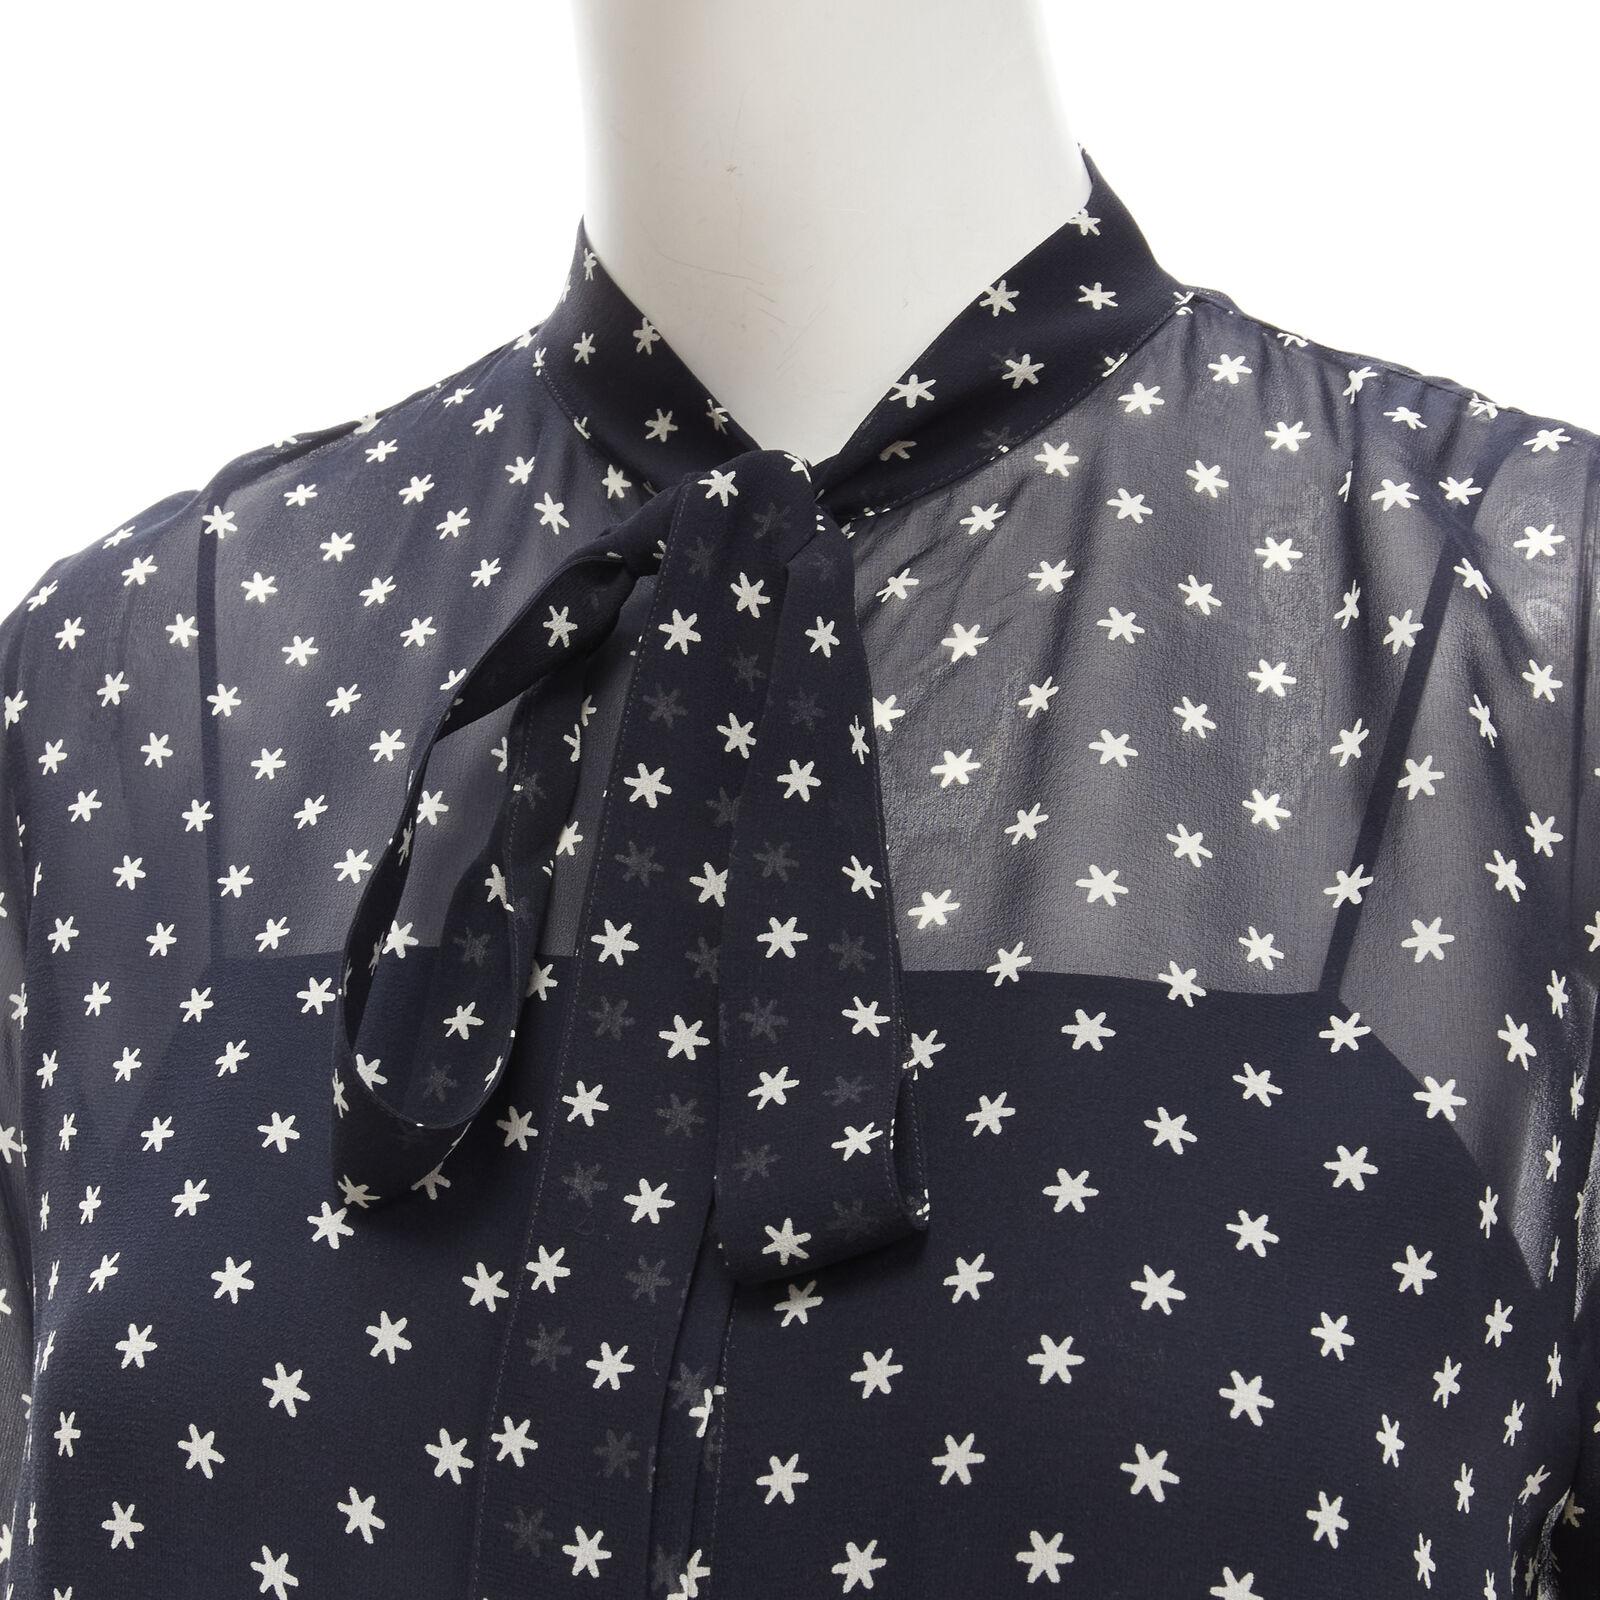 CHRISTIAN DIOR 100% silk navy white star pussy bow blouse shirt FR34 XS
Reference: AAWC/A00262
Brand: Christian Dior
Designer: Maria Grazia Chiuri
Material: 100% Silk
Color: Navy, White
Pattern: Star
Closure: Button
Lining: Silk
Extra Details: Self